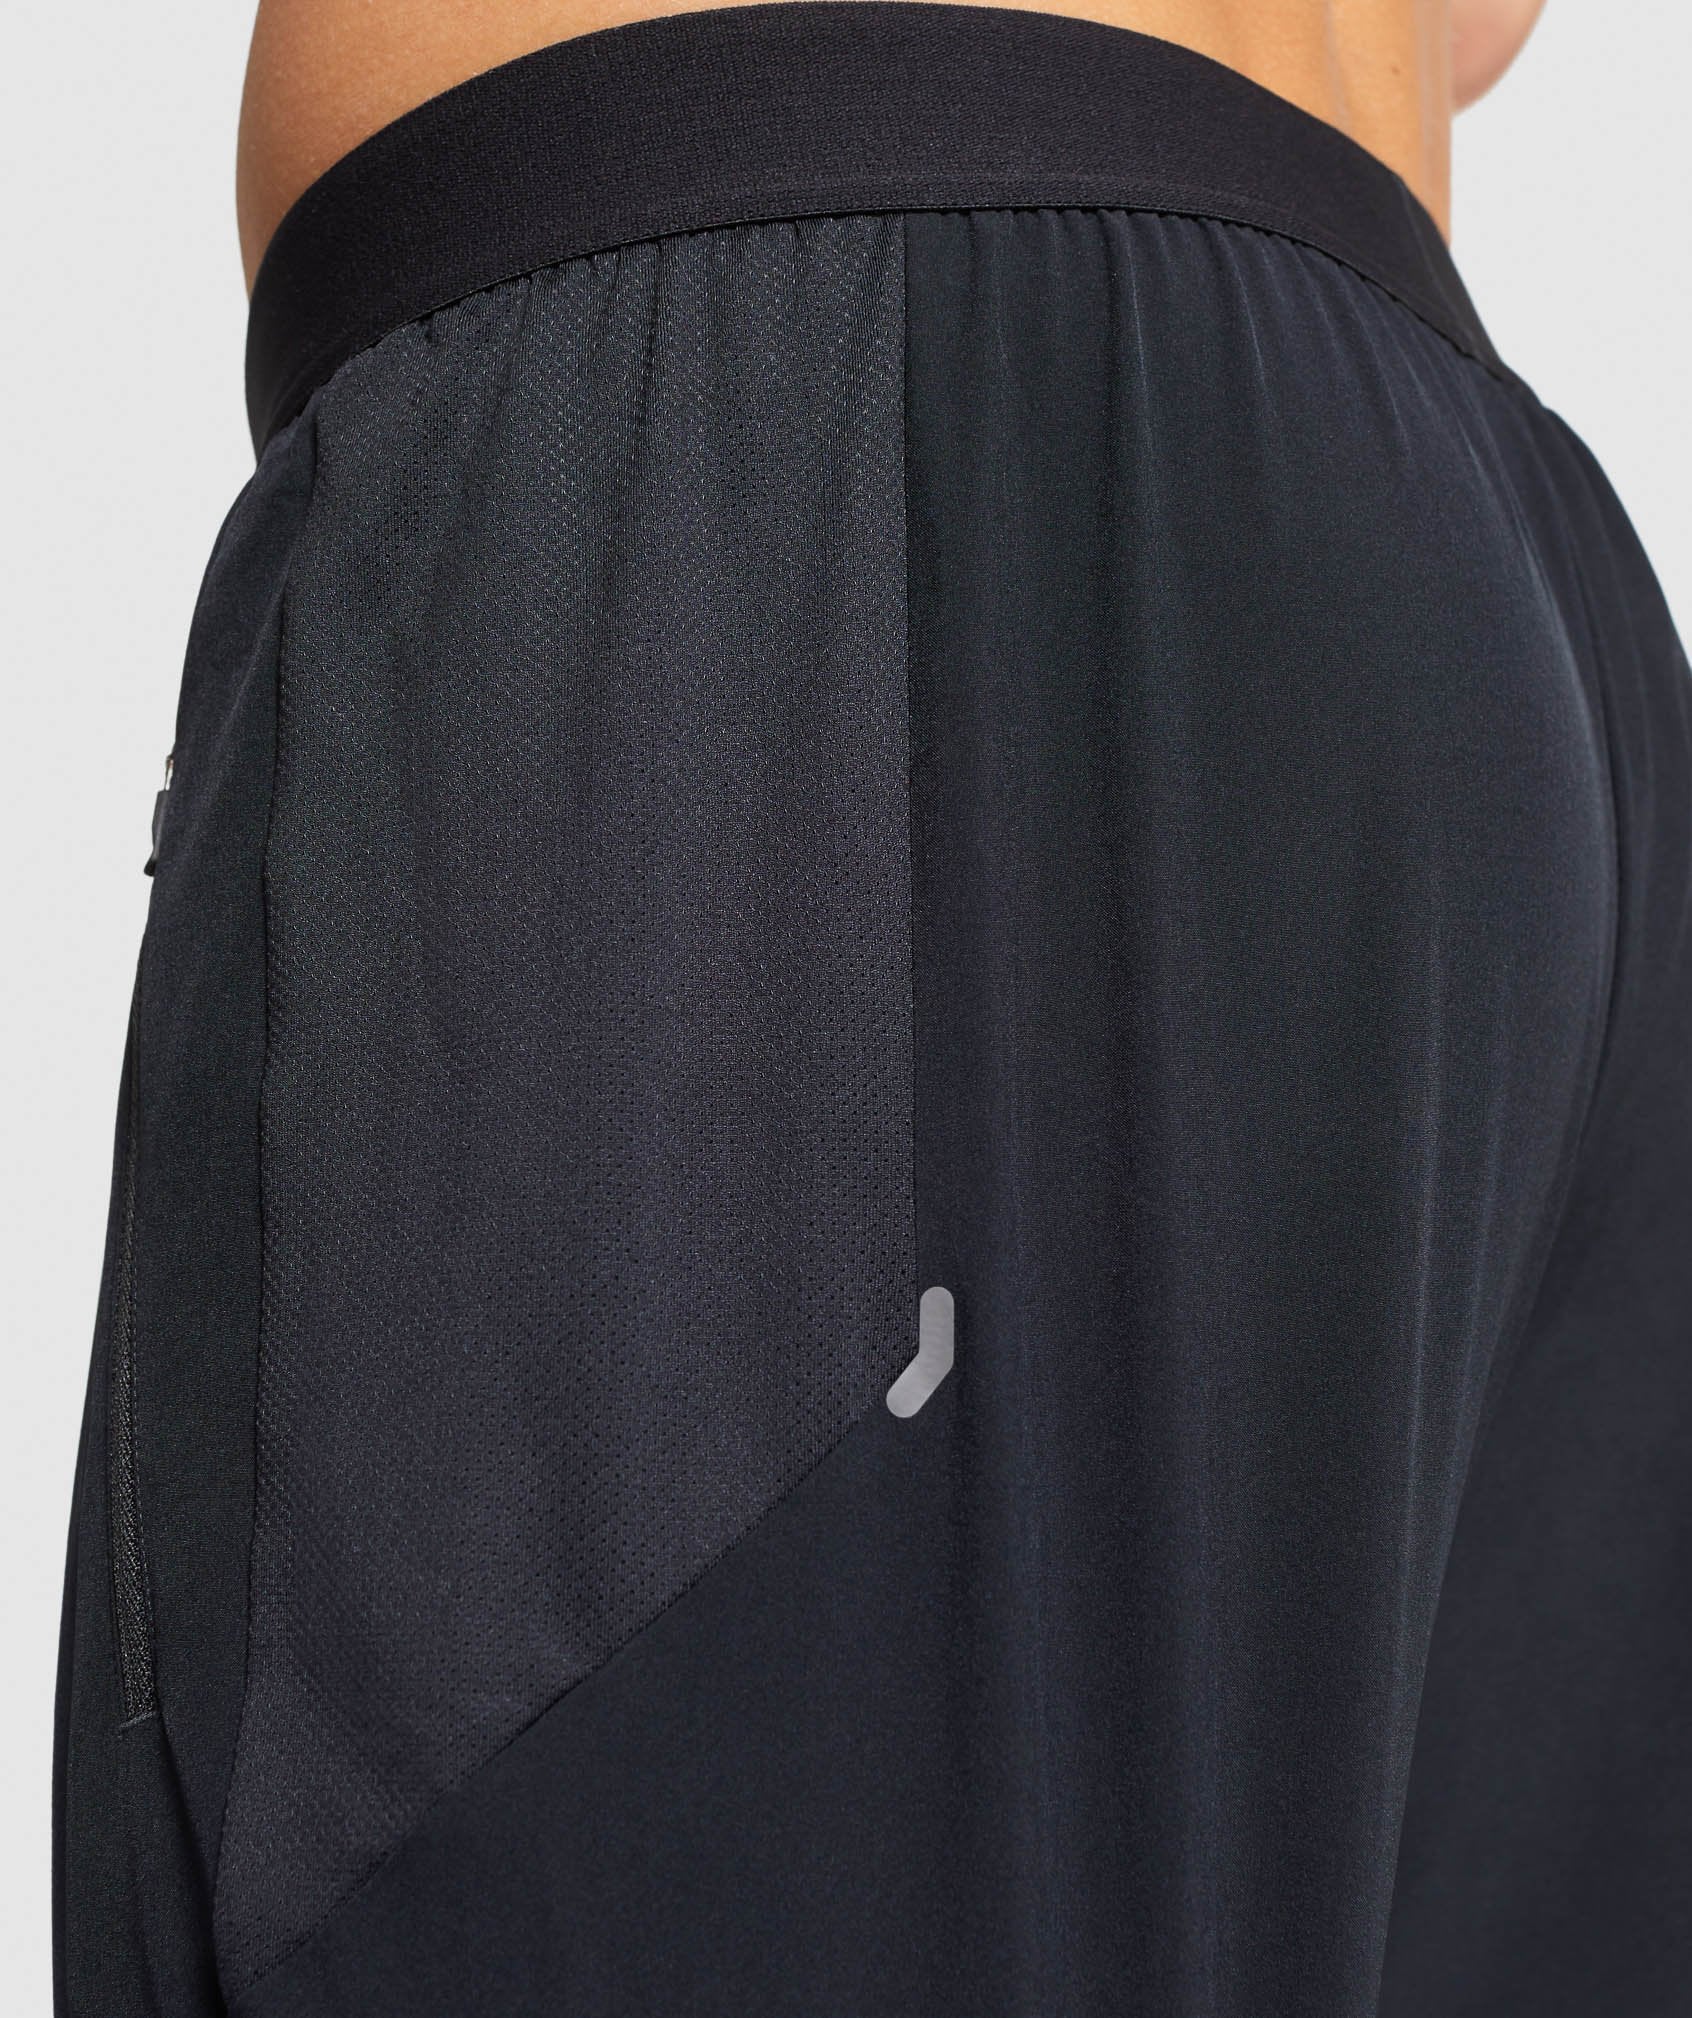 Element Hiit 2 in 1 Shorts in Black - view 3